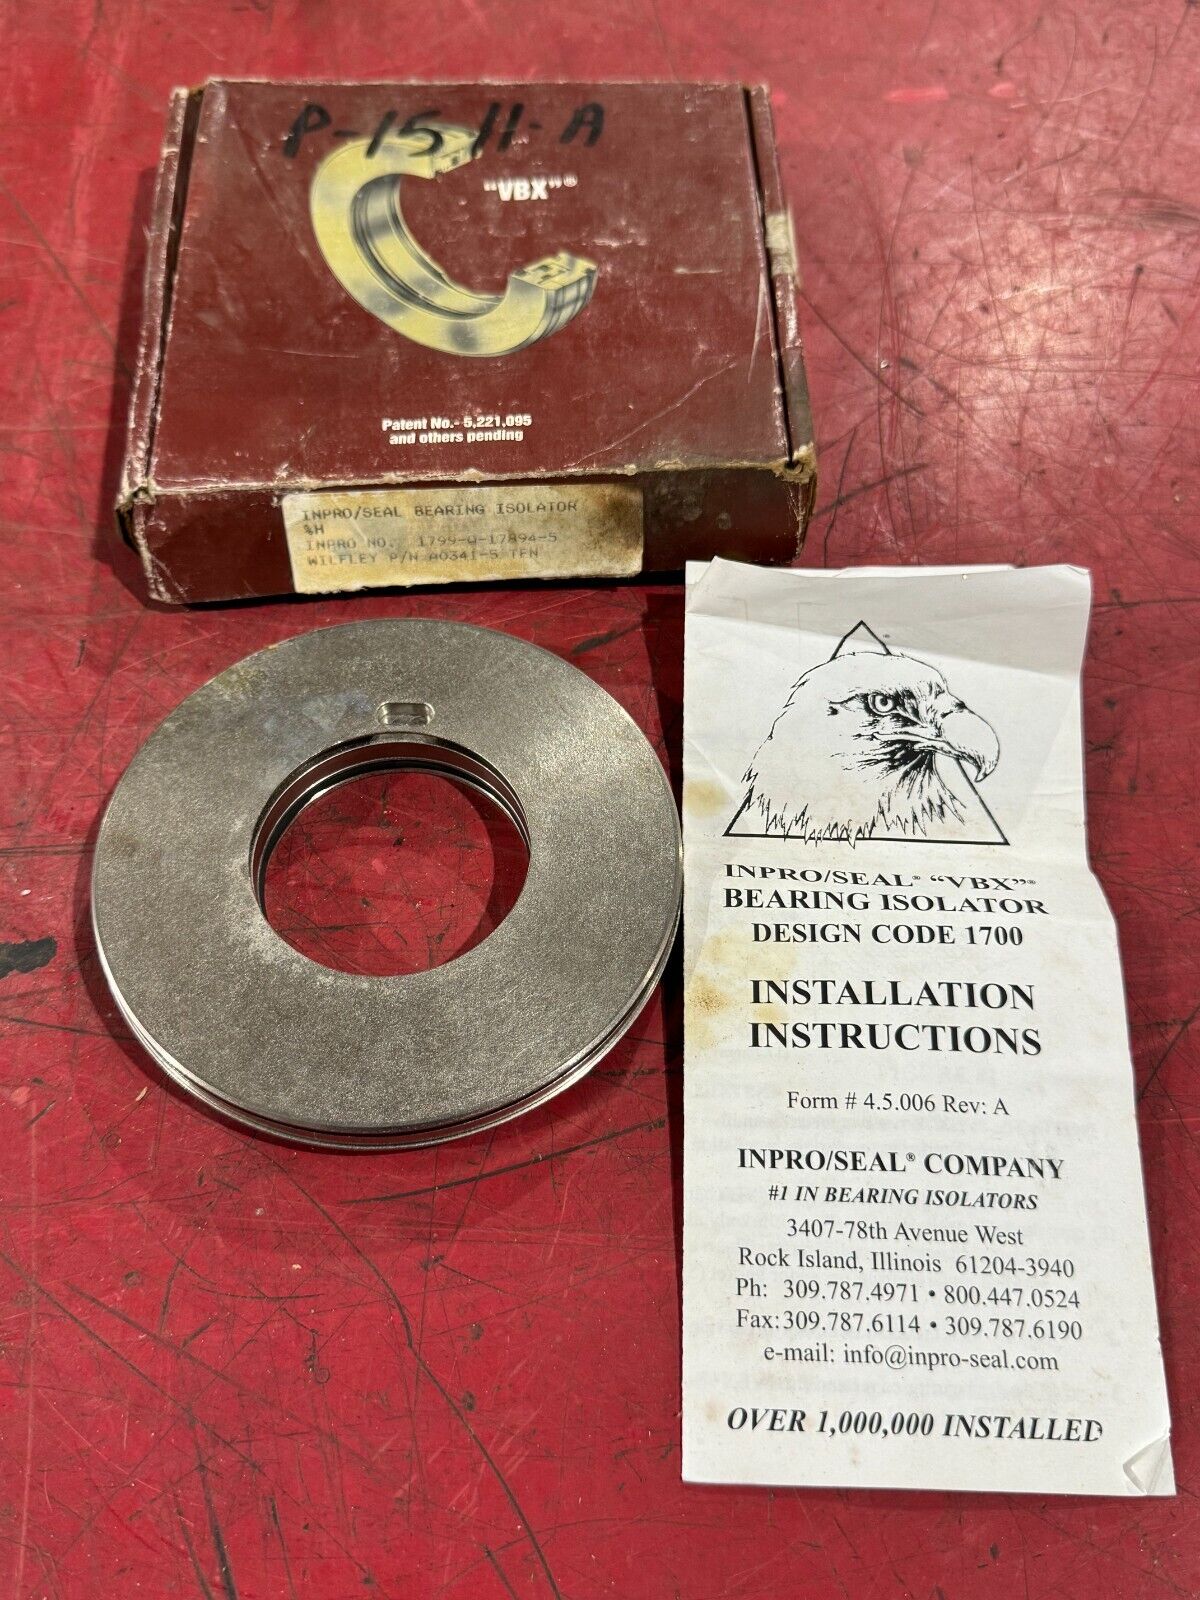 NEW IN BOX INPRO/SEAL BEARING ISOLATOR 1799-Q-17894-5 A0341-5 TFN